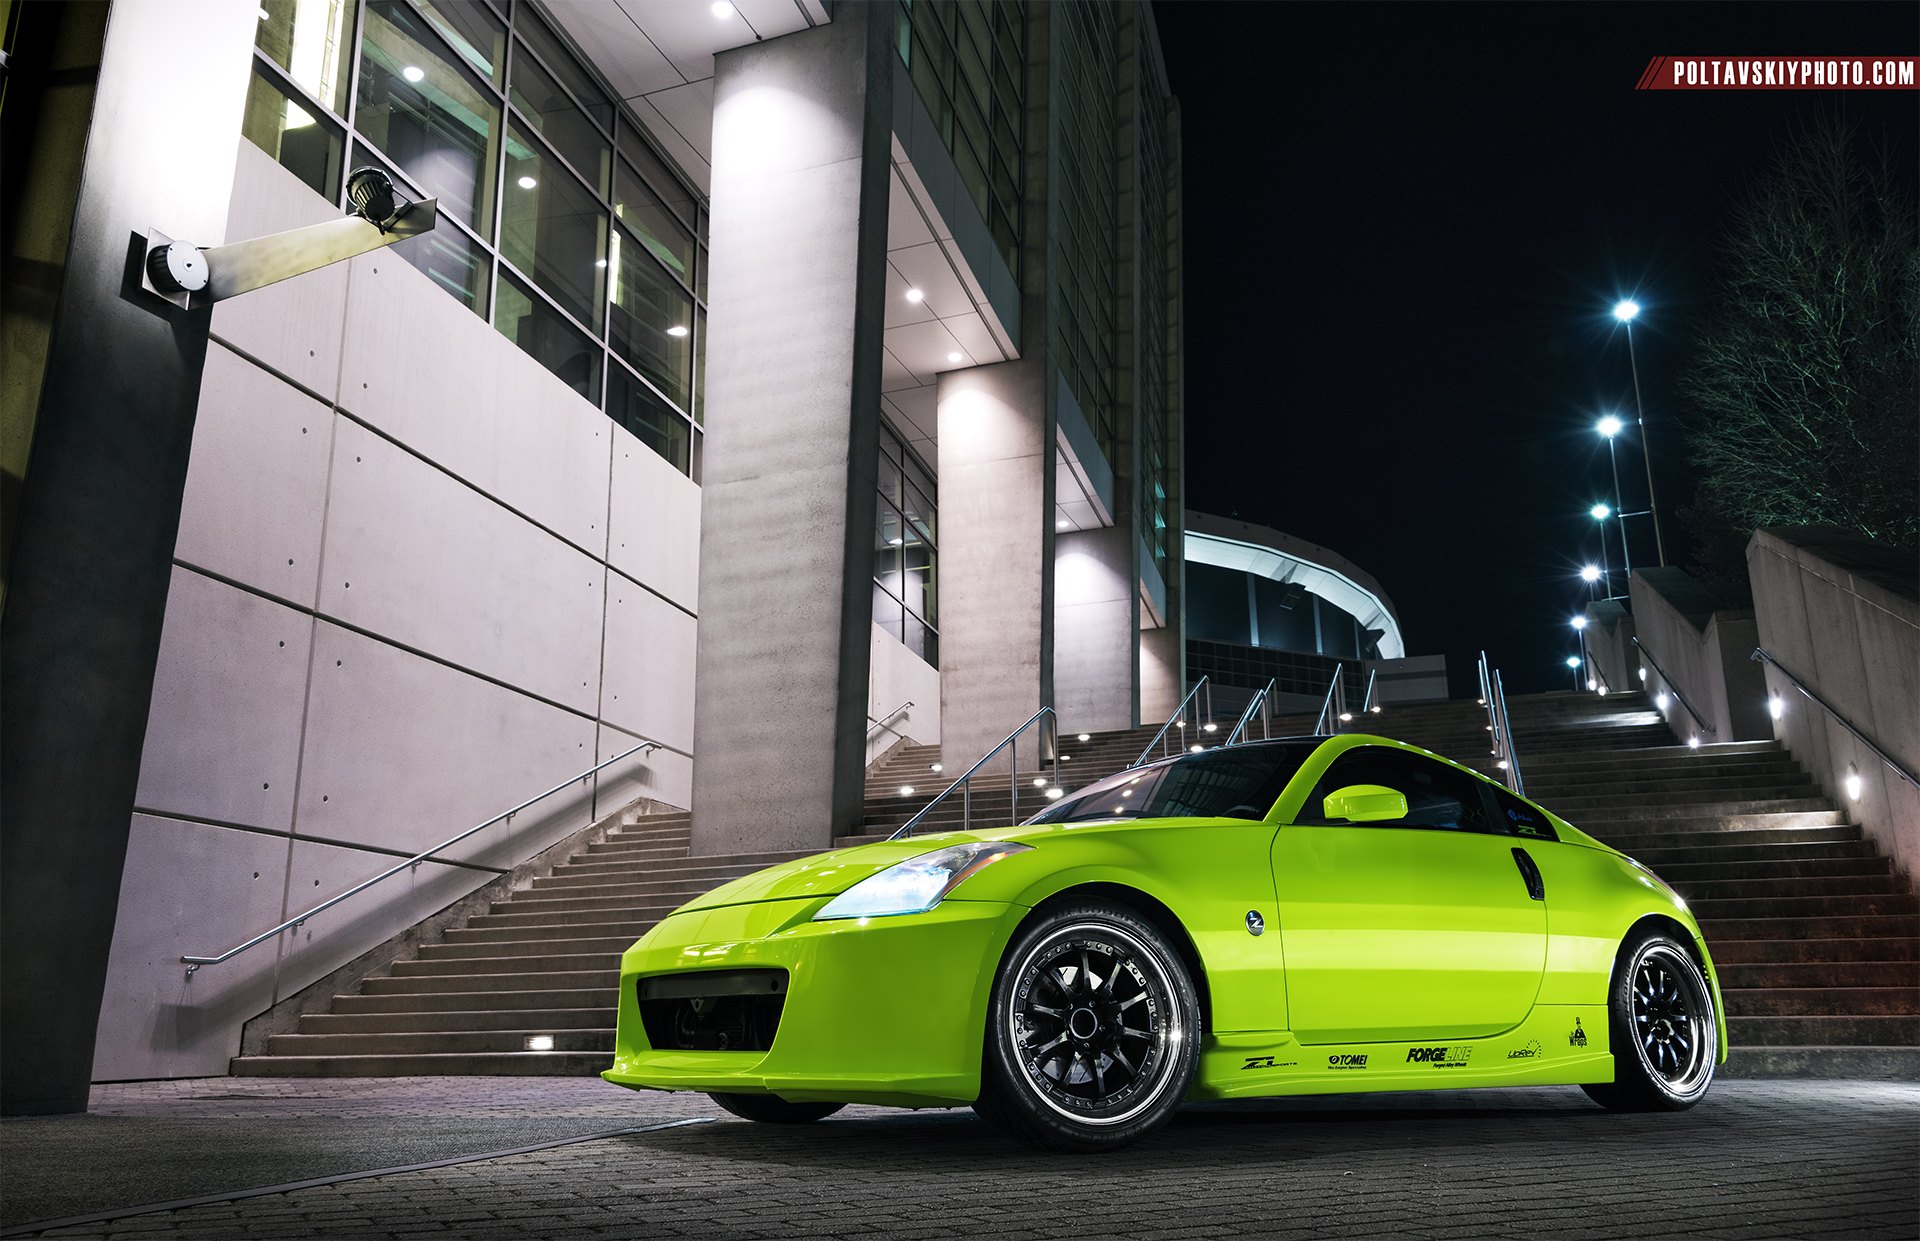 Lime Green Debadged Nissan 350Z with Custom Headlights - Photo by Forgeline Motorsports